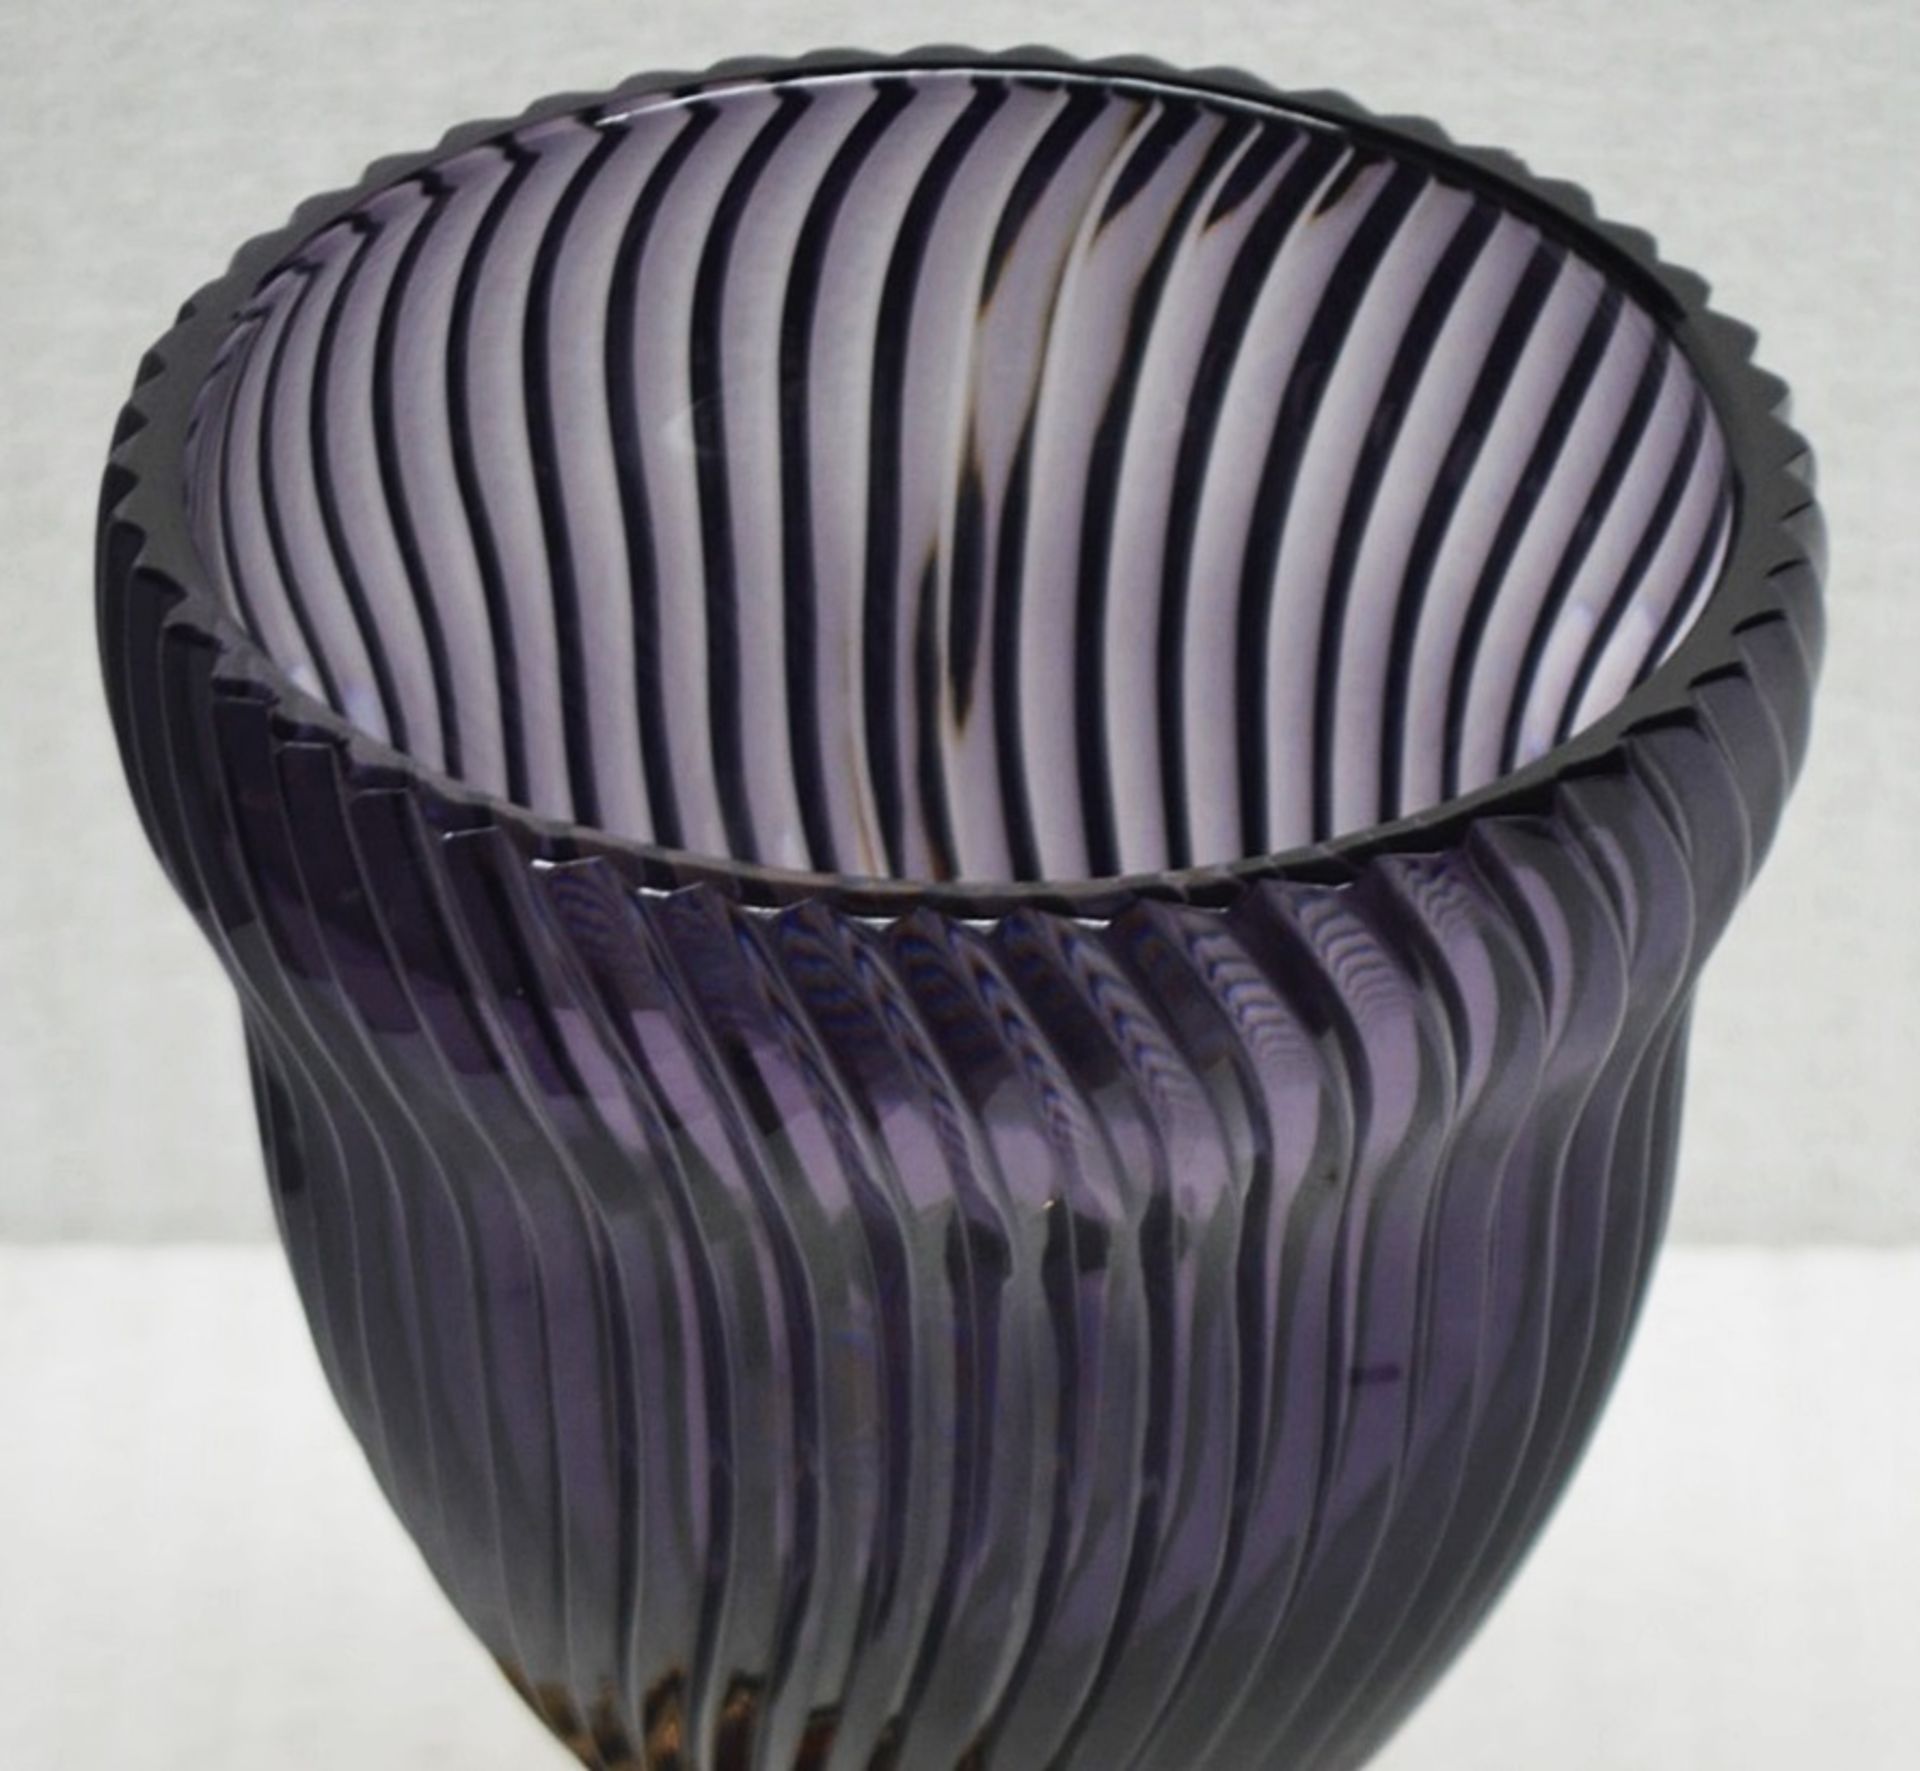 1 x BALDI 'Home Jewels' Italian Hand-crafted Artisan GHIAHDA VASE In Violet Crystal - RRP £1,925 - Image 5 of 5